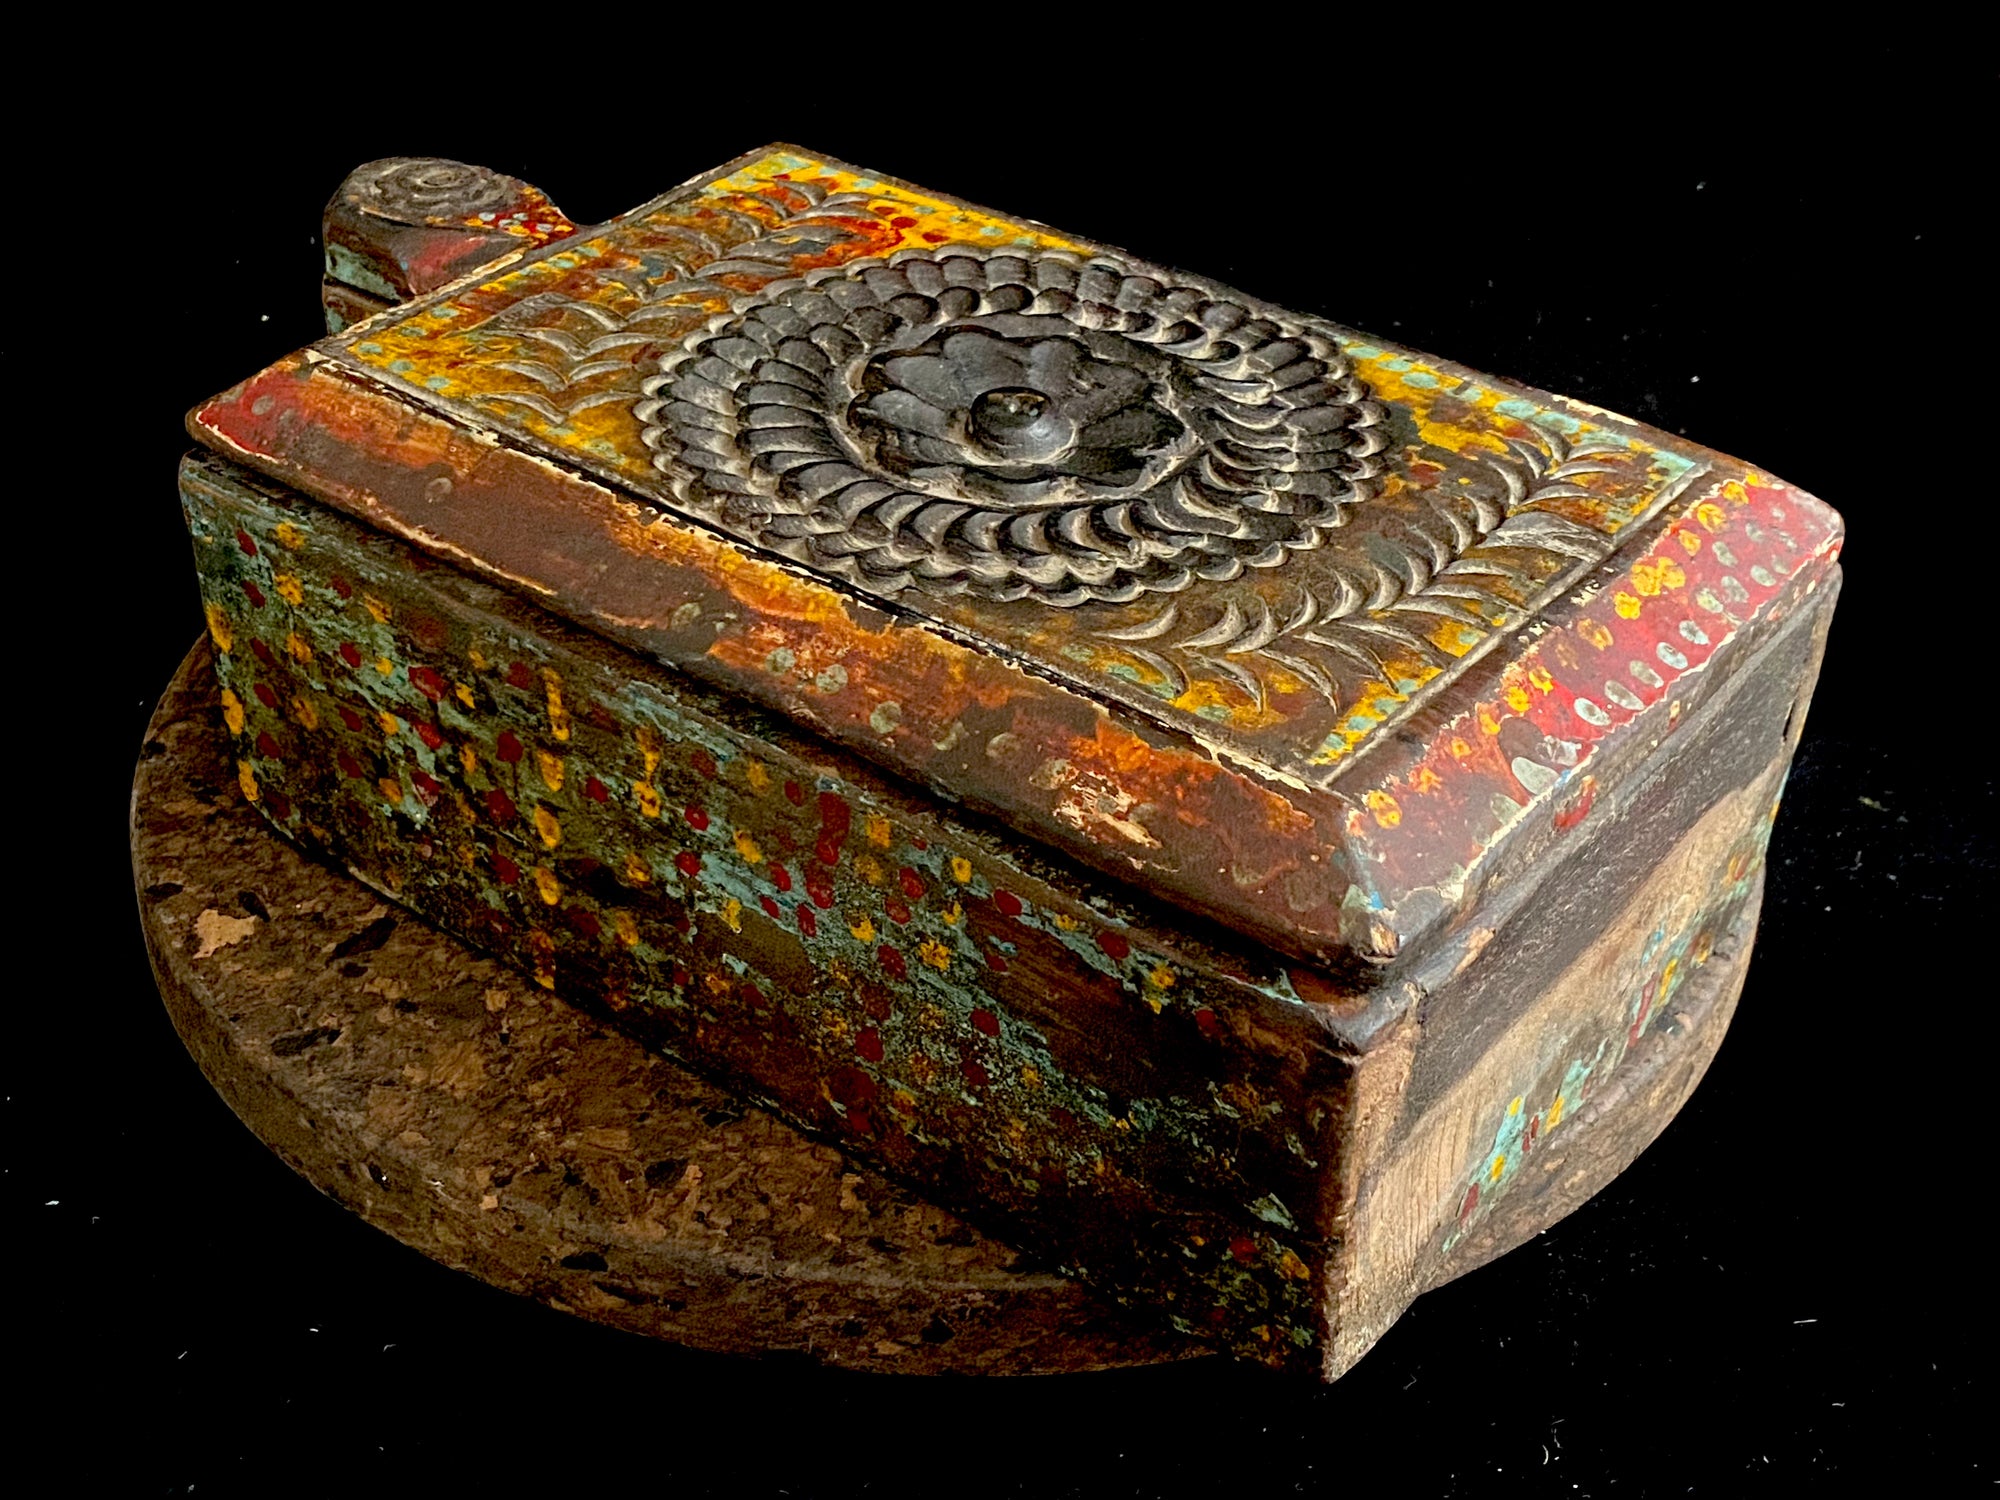 A lovely old southern Indian spice box with carved top, hand painted and swivel lid. Made from teak. Two compartments. This would make a lovely trinket box, key box, jewellery, watch or cufflink box. Circa 1880 - 1920. Handmade in southern India. Measurements: length 26 cm; depth 15 cm, height 9 cm.